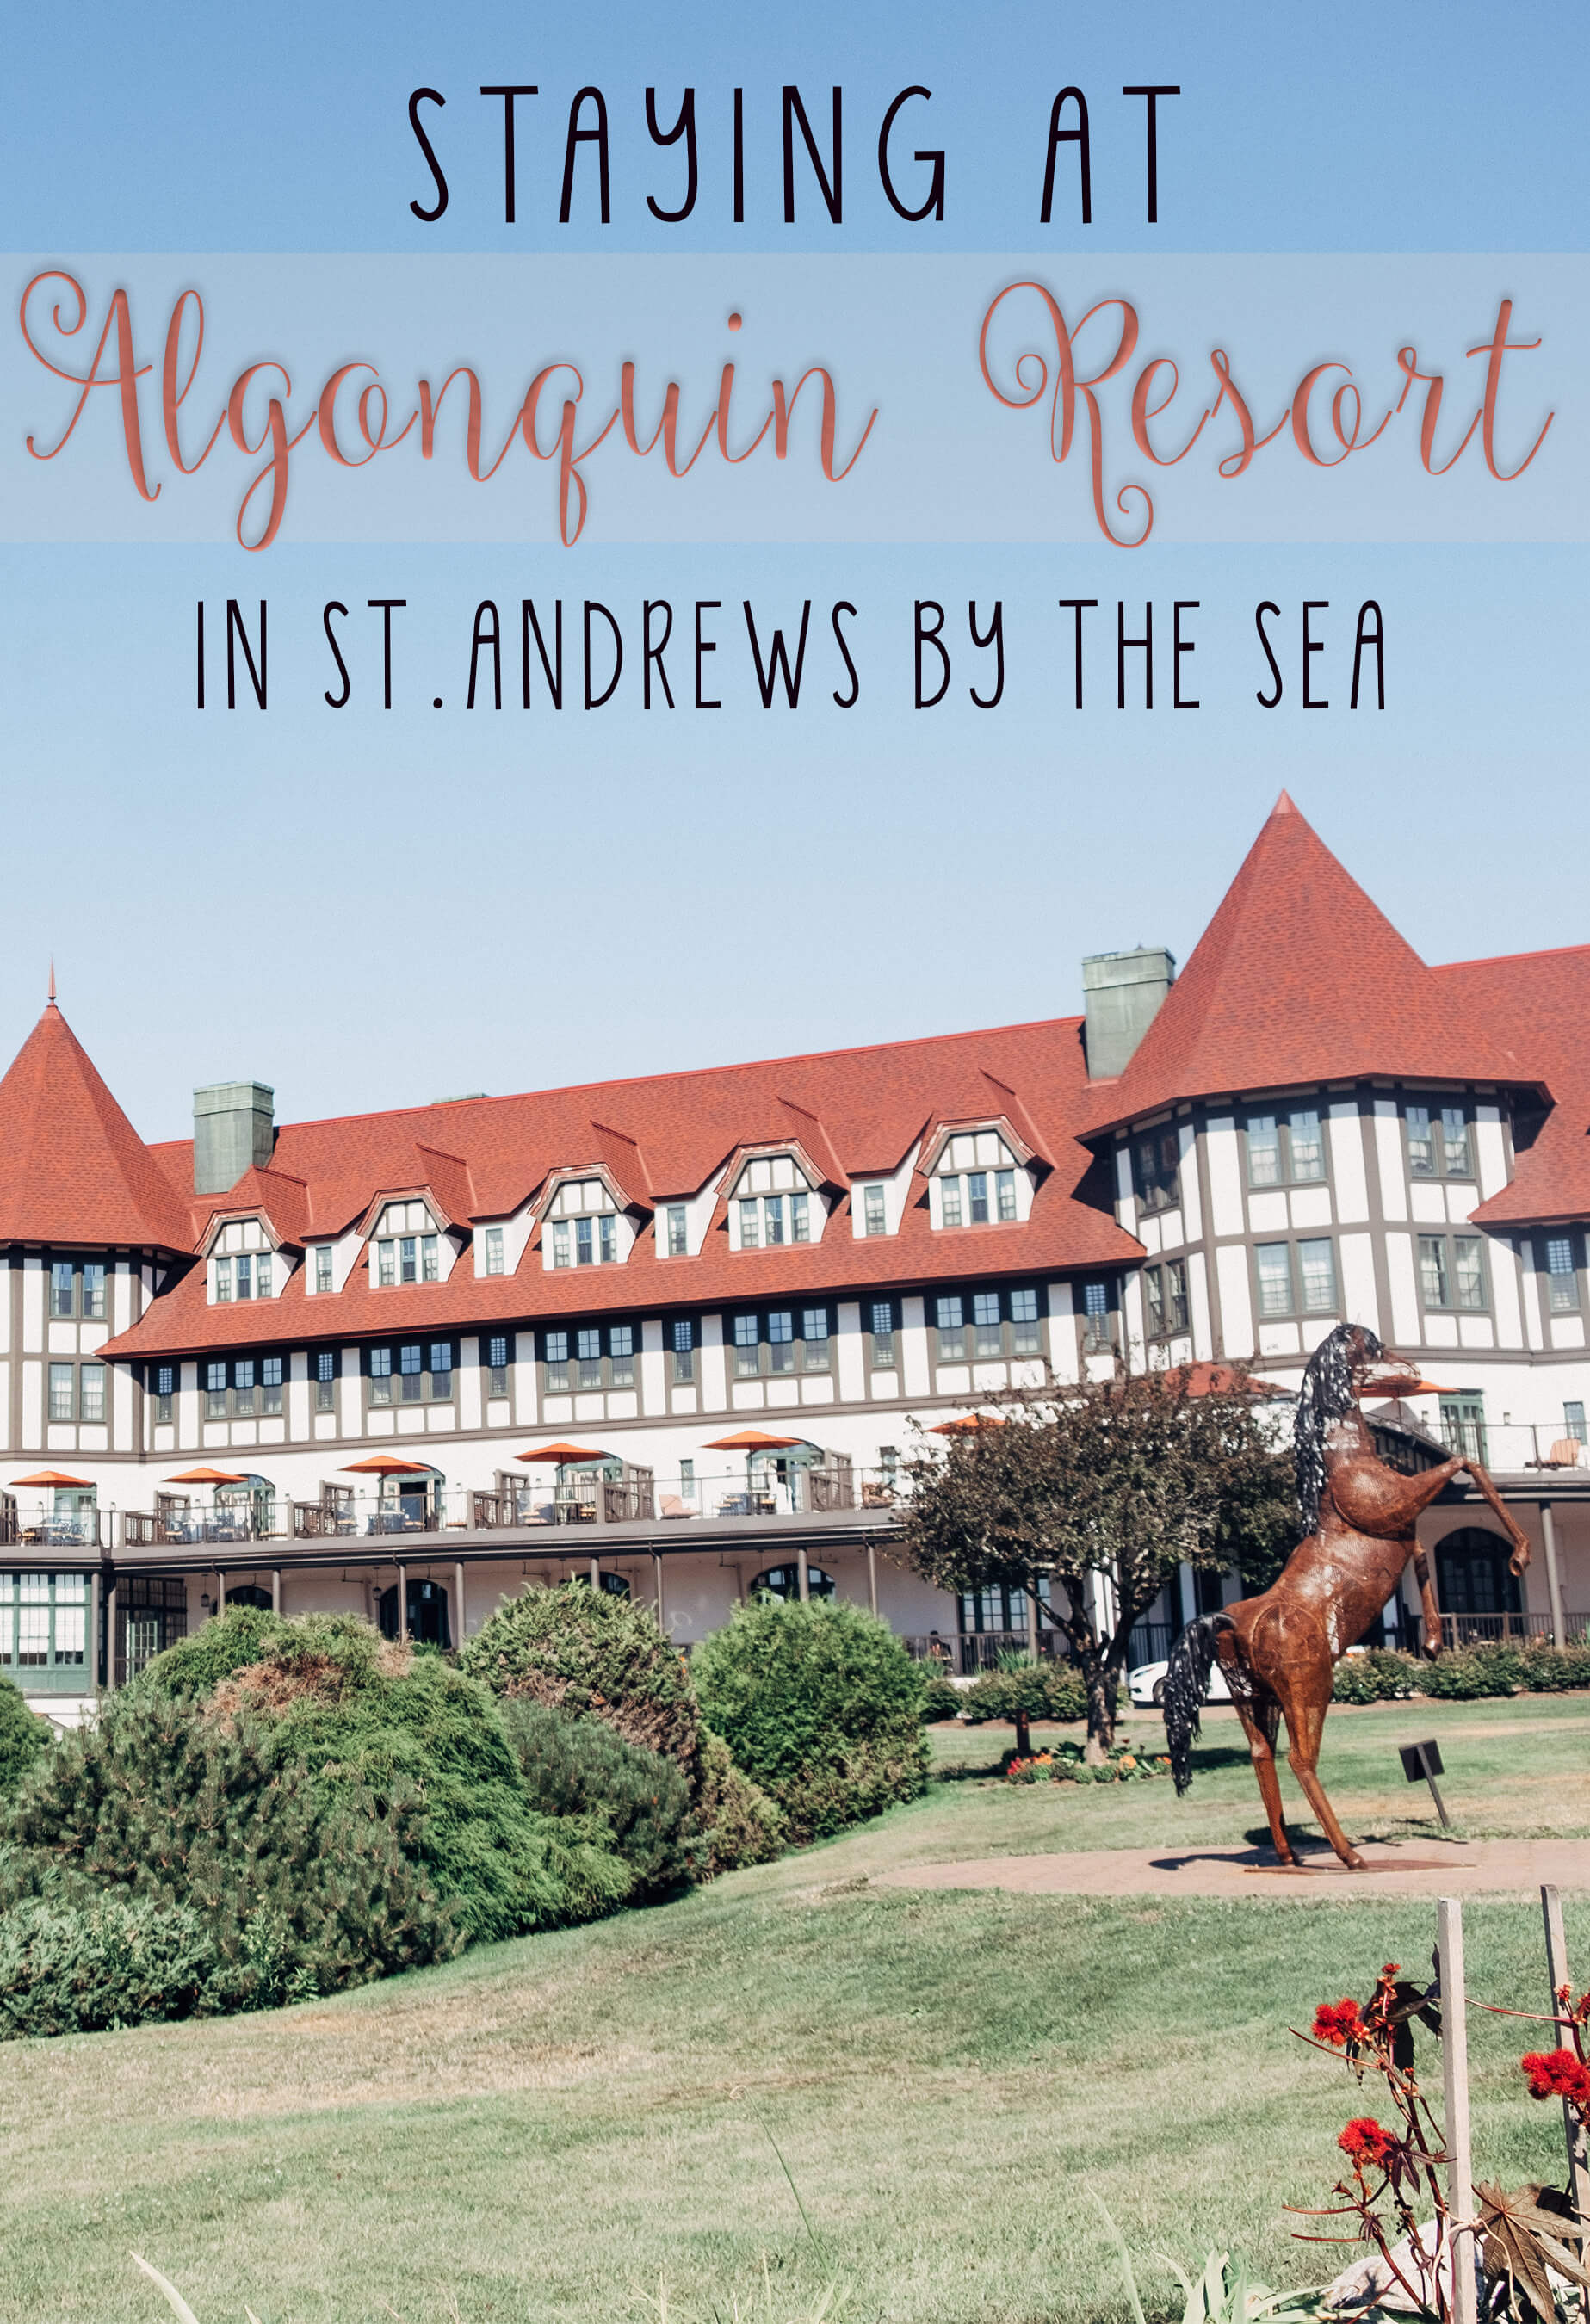 Picture of Algonquin Resort with text